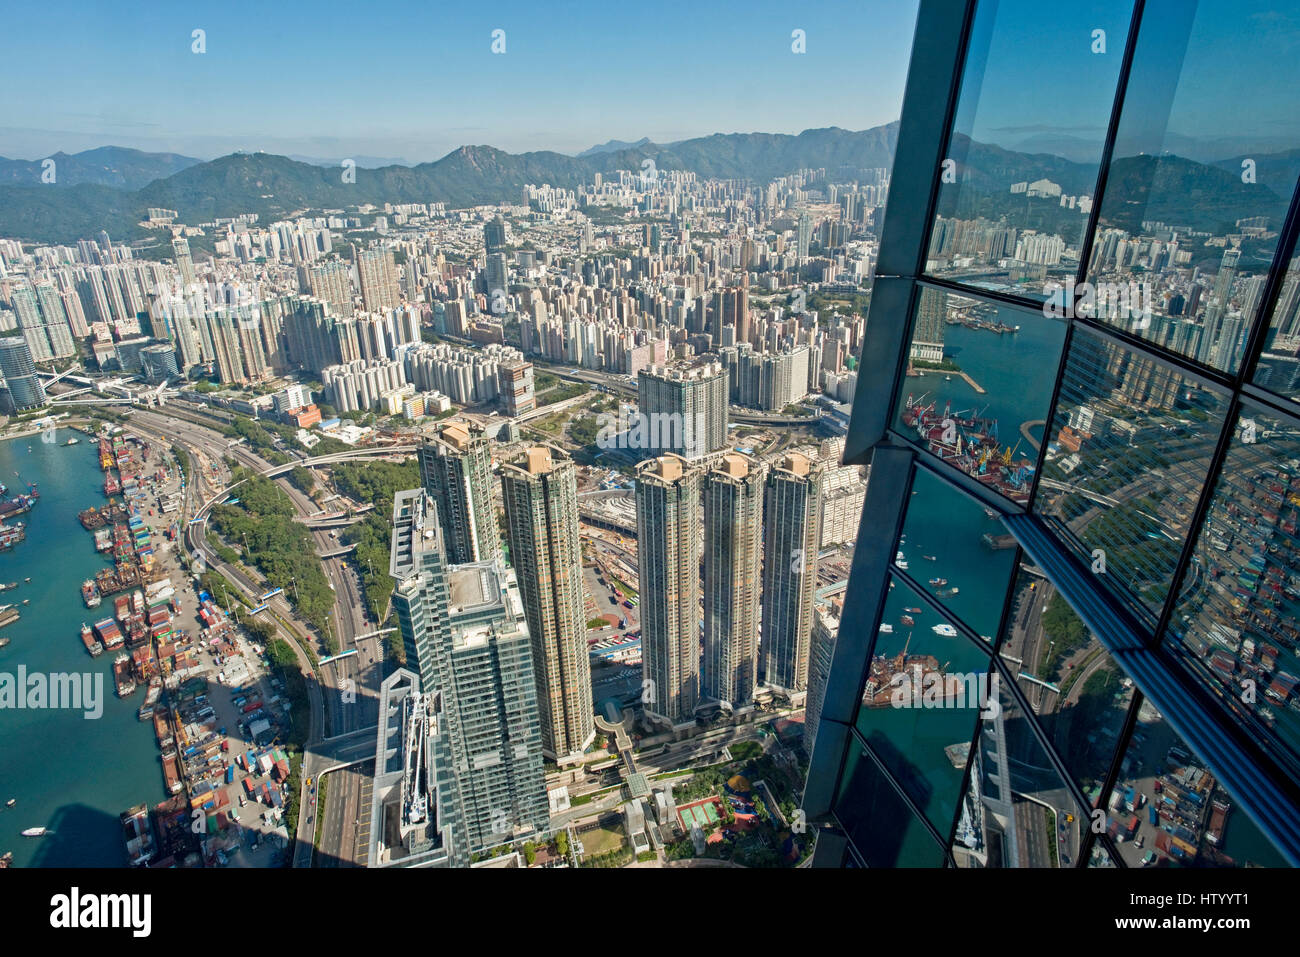 An aerial cityscape view of the Mong Kok area of Kowloon in Hong Kong taken from the Sky100 on the ICC building. Stock Photo